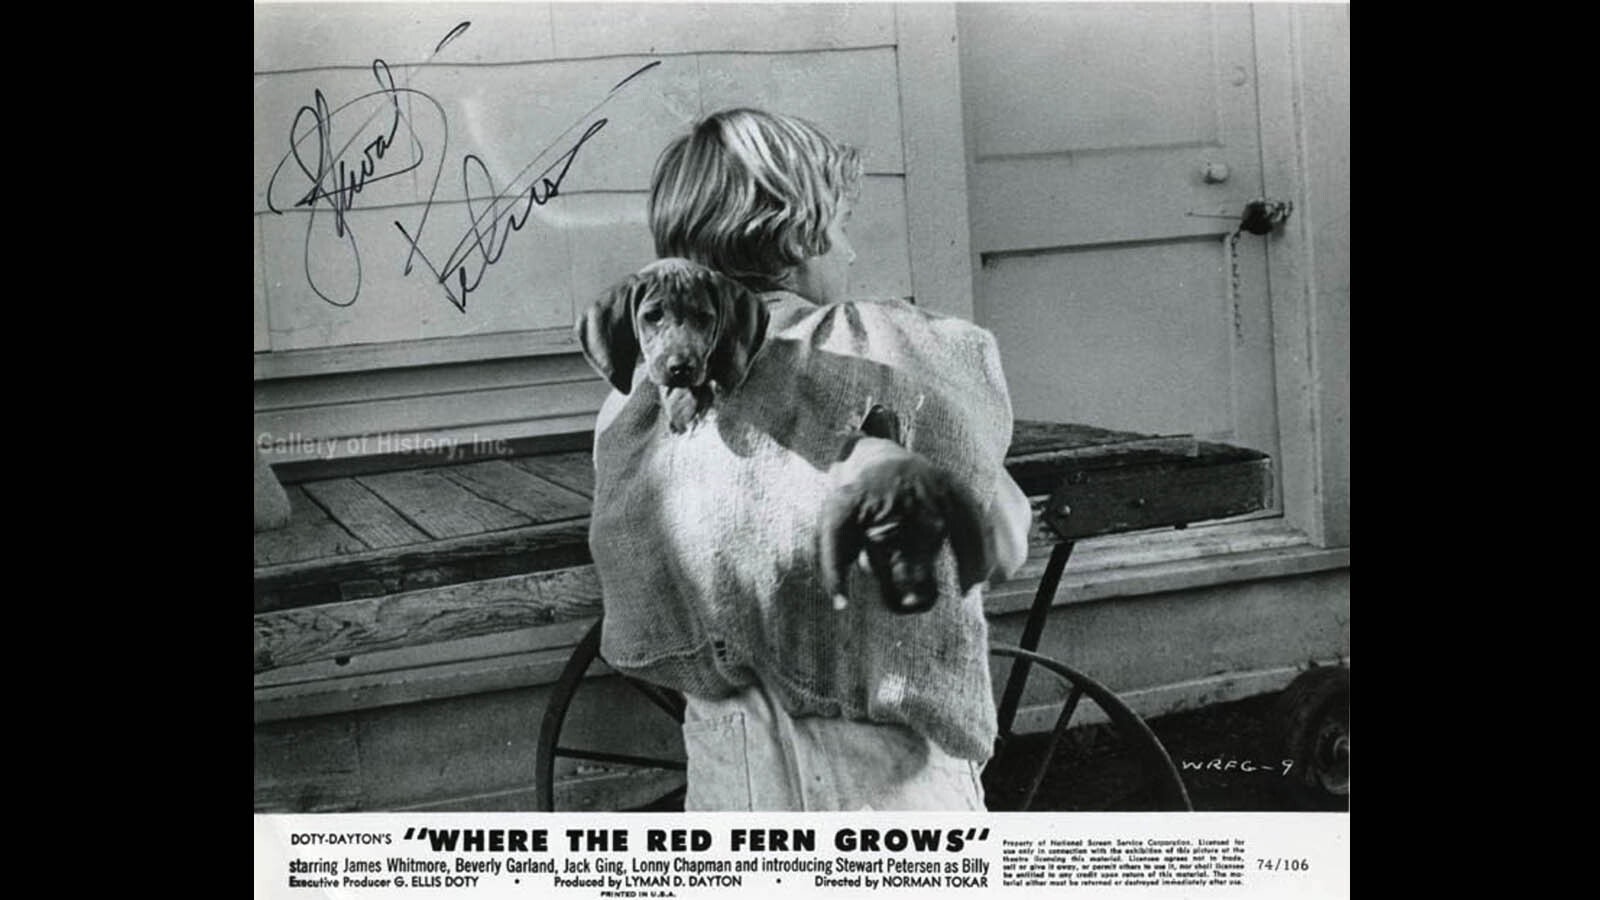 At autographed Stewart Petersen photo as Billy in “Where The Red Fern Grows.”